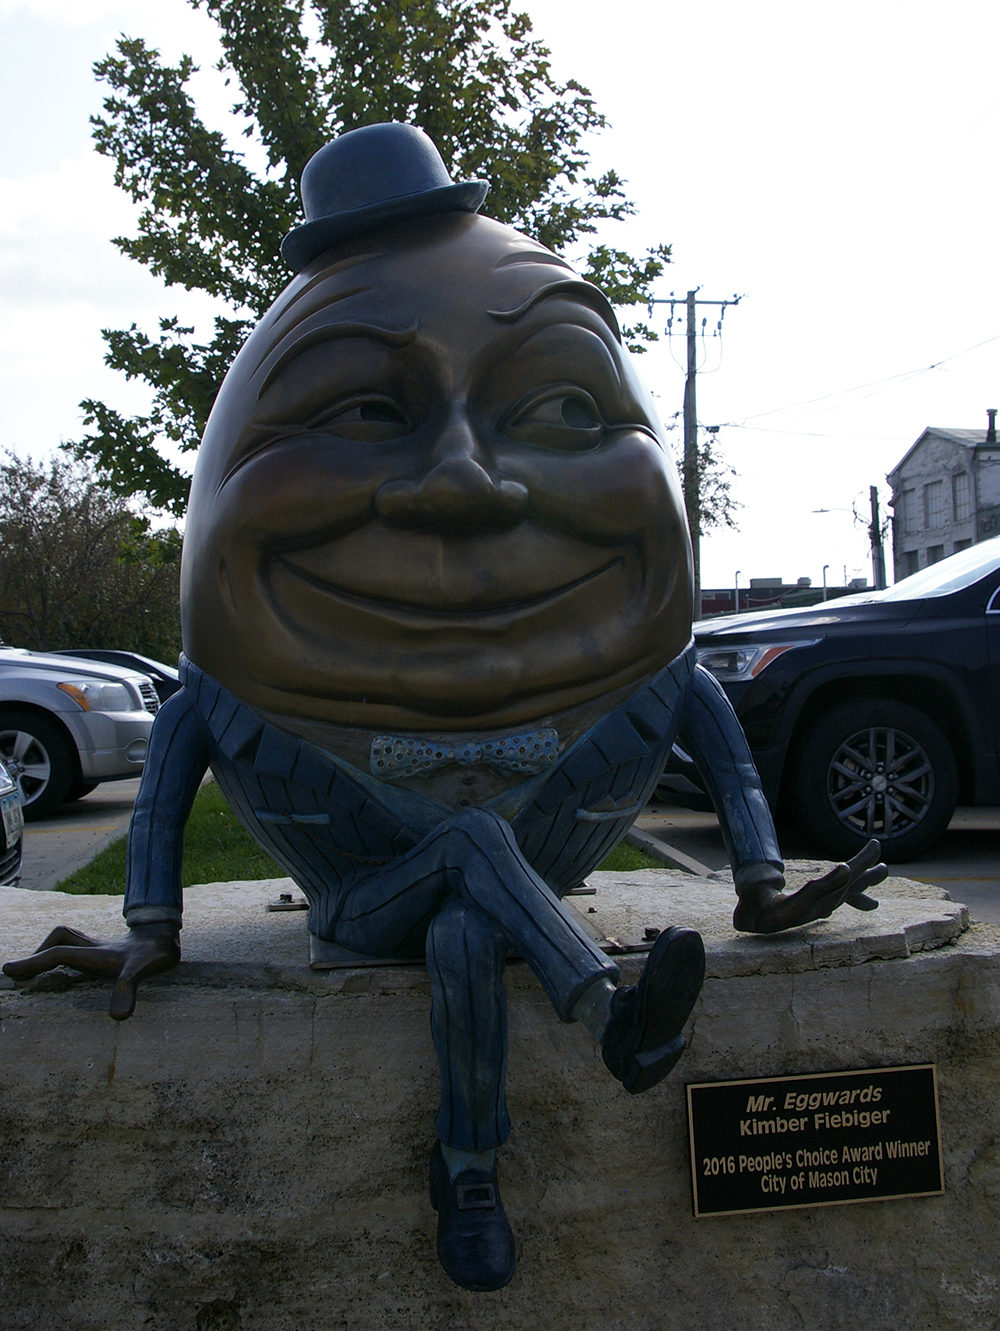 Metal Humpty Dumpty sculpture along the River City Sculptures on Parade in Mason City, Iowa